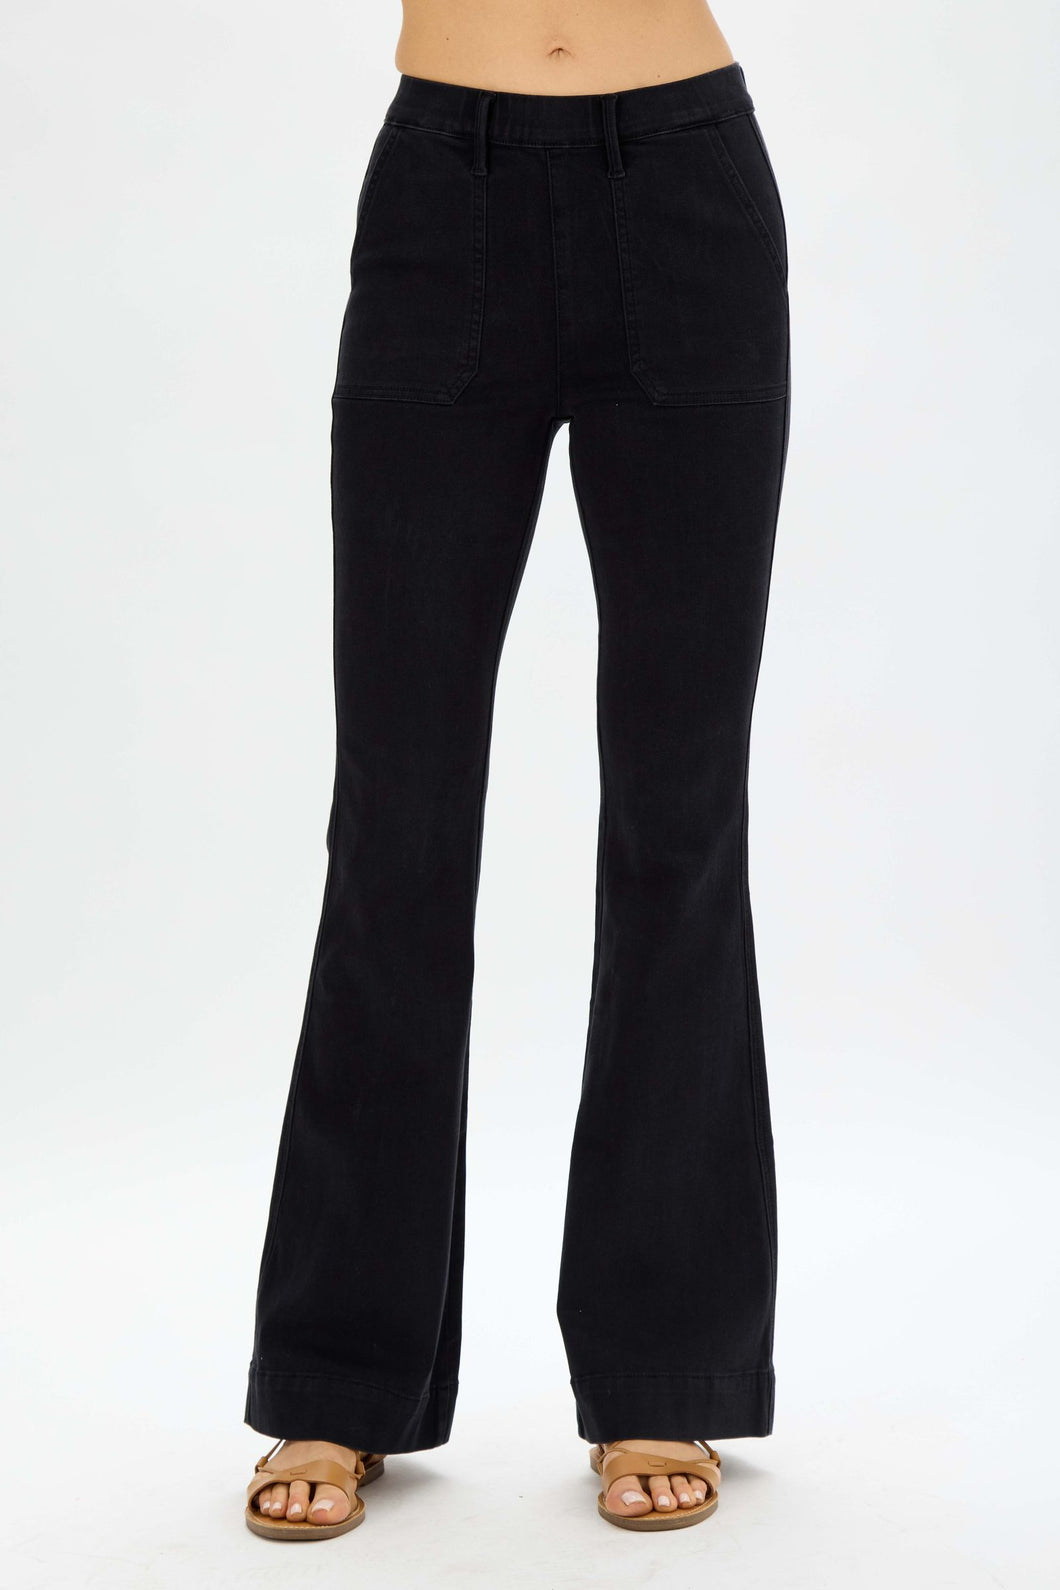 JUDY BLUE Black Pull On Trouser Flare Jeans